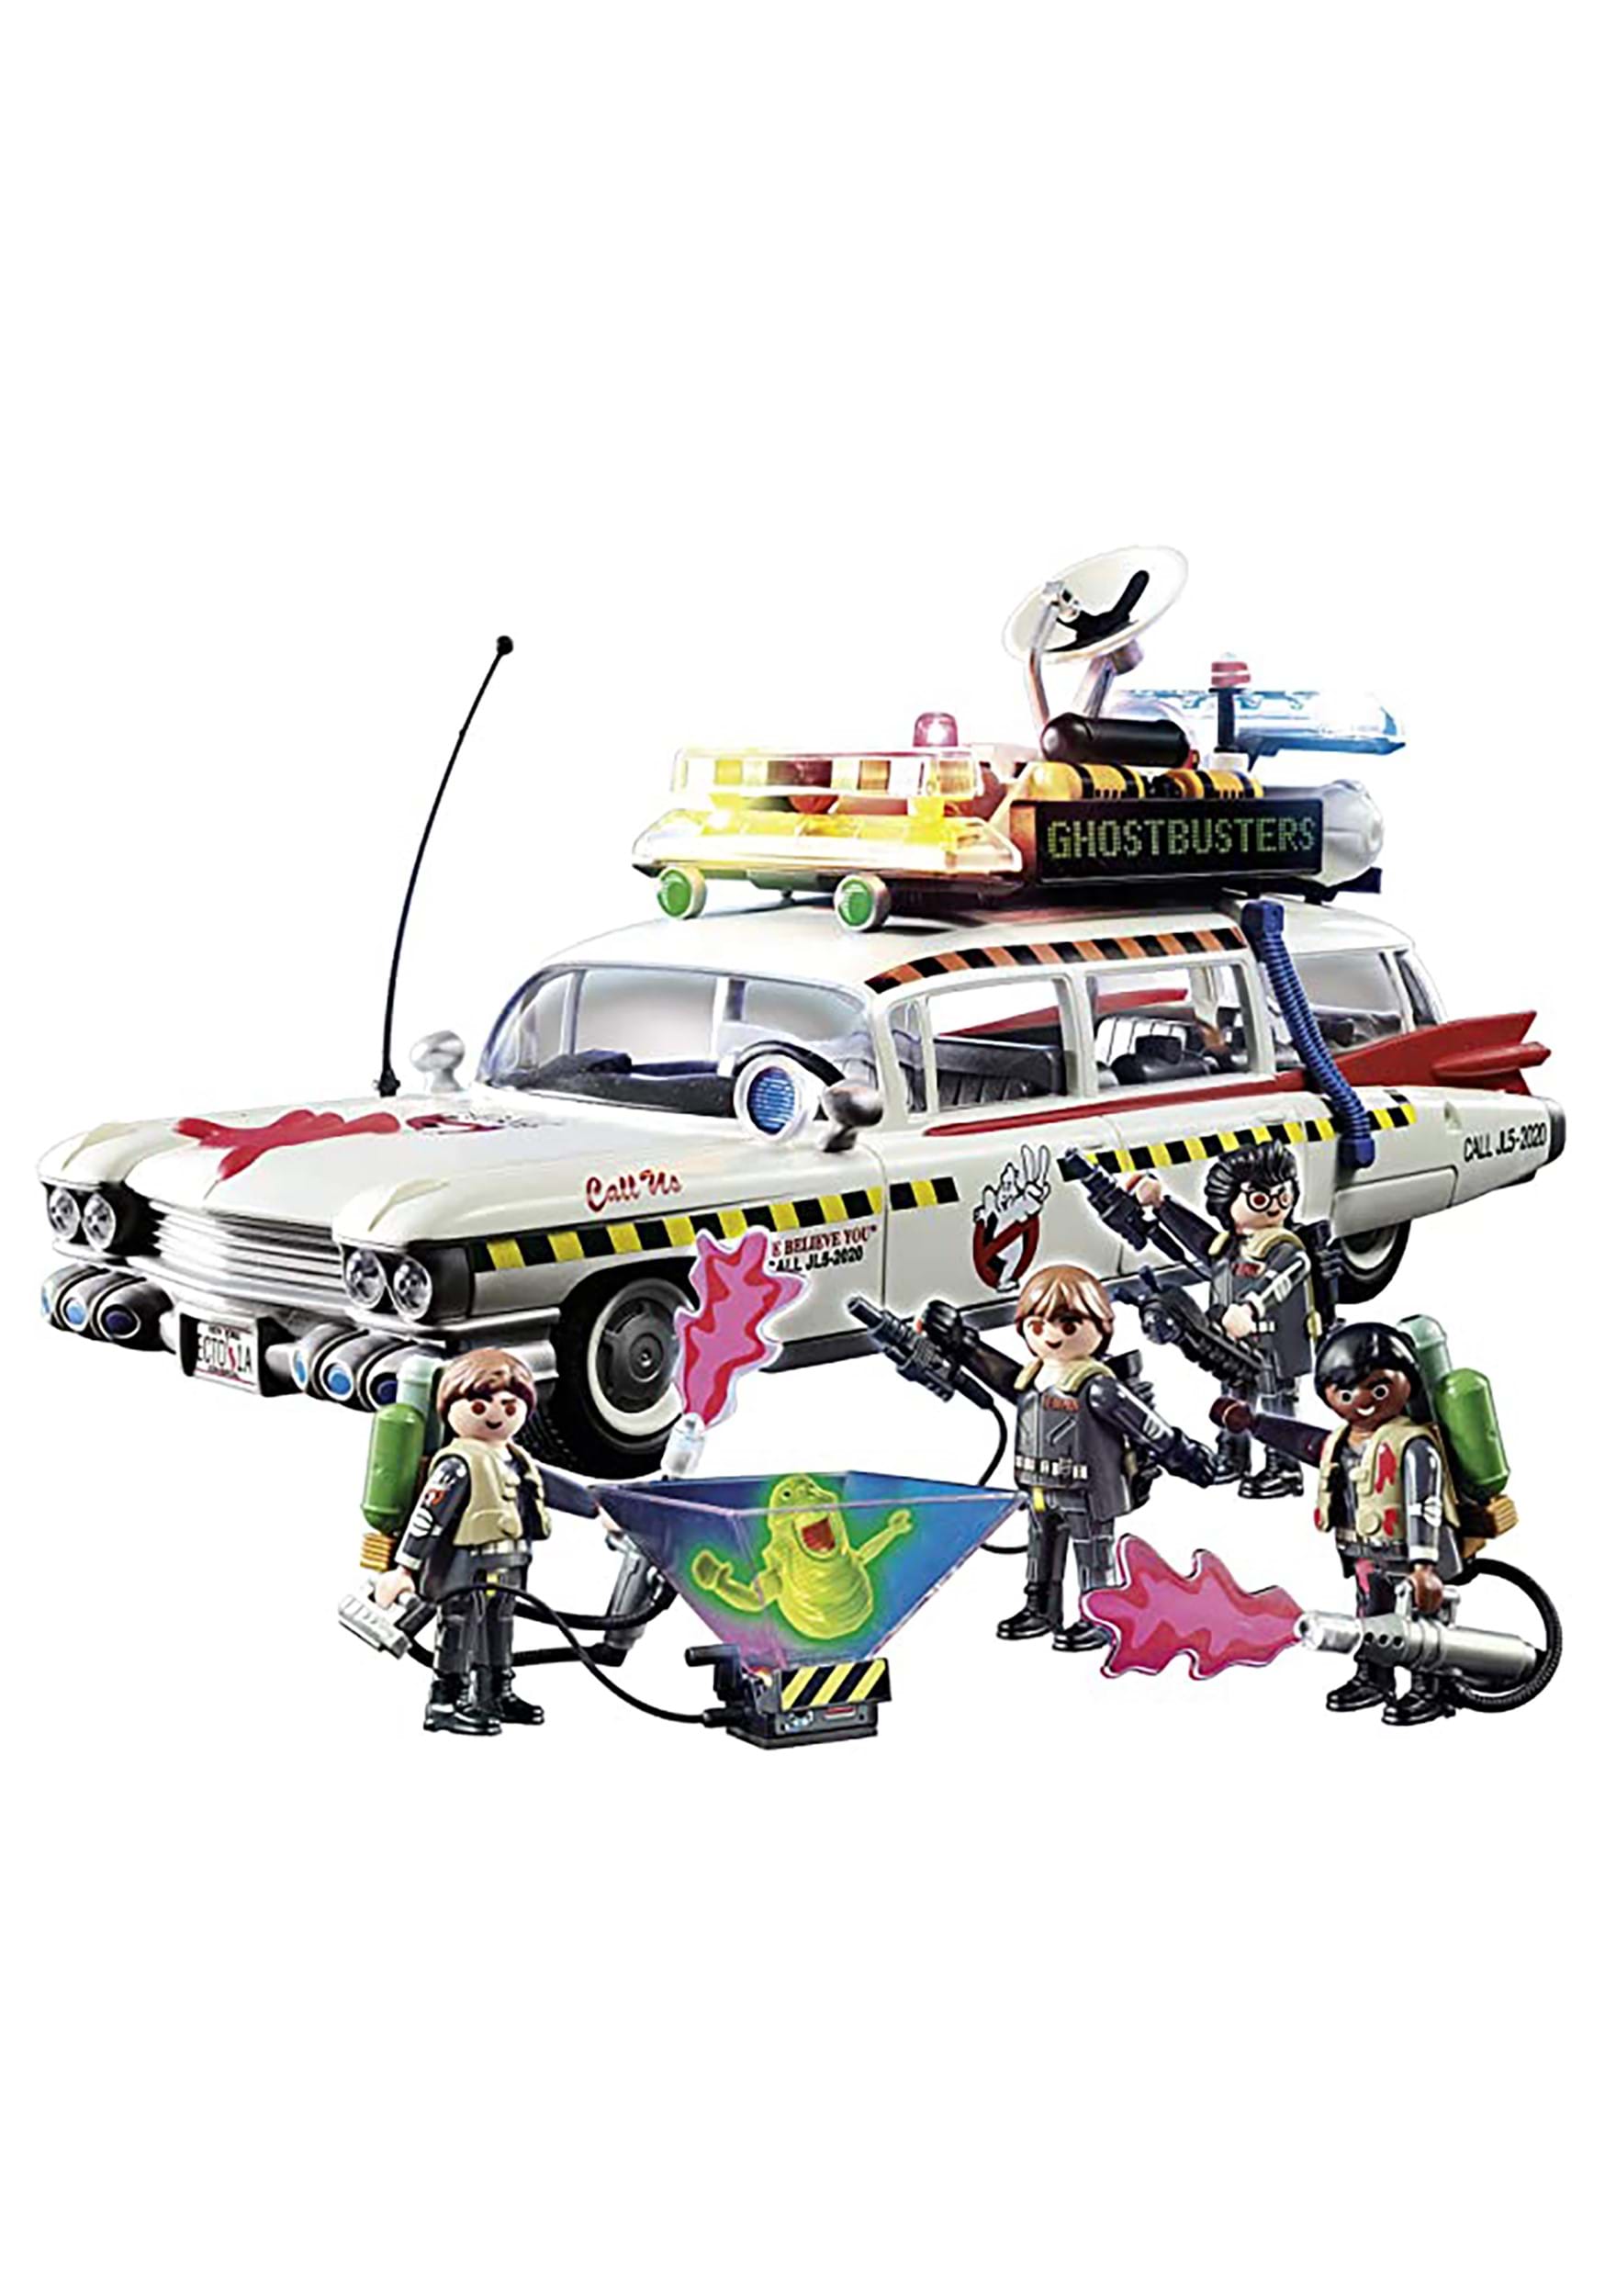 Chemist Complain atomic Ghostbusters Ecto-1A Playmobil Vehicle